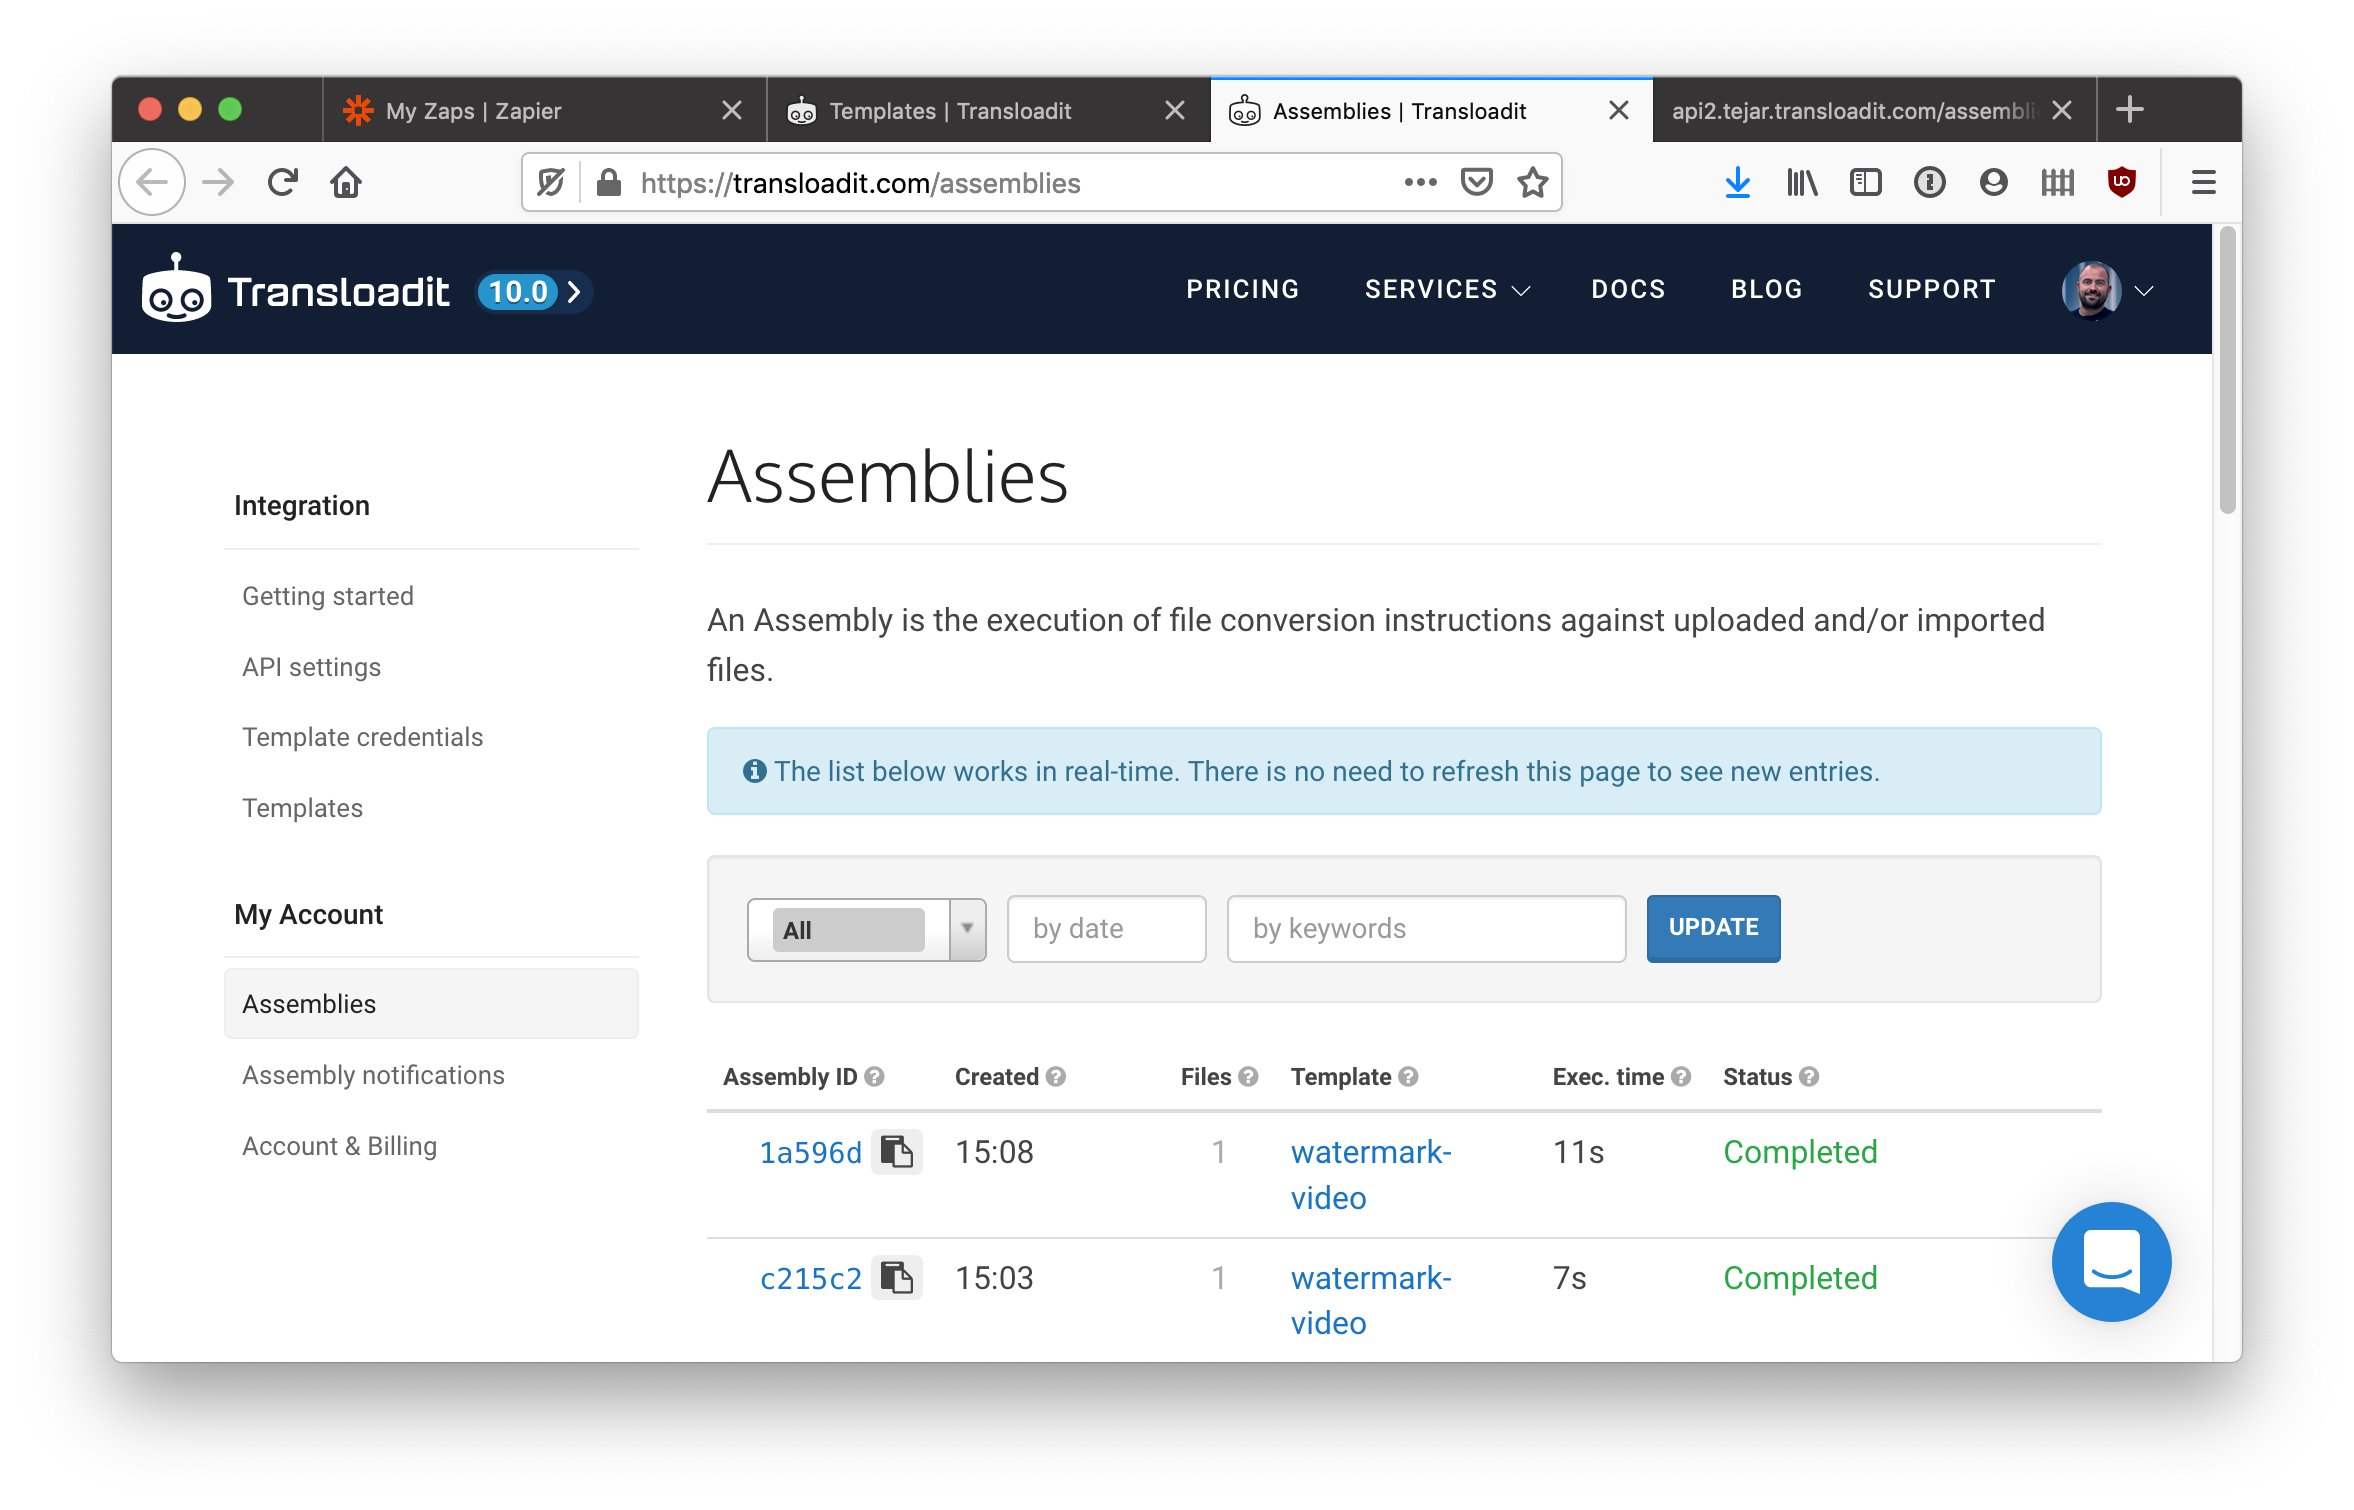 The Transloadit Assemblies page with two successful Assemblies